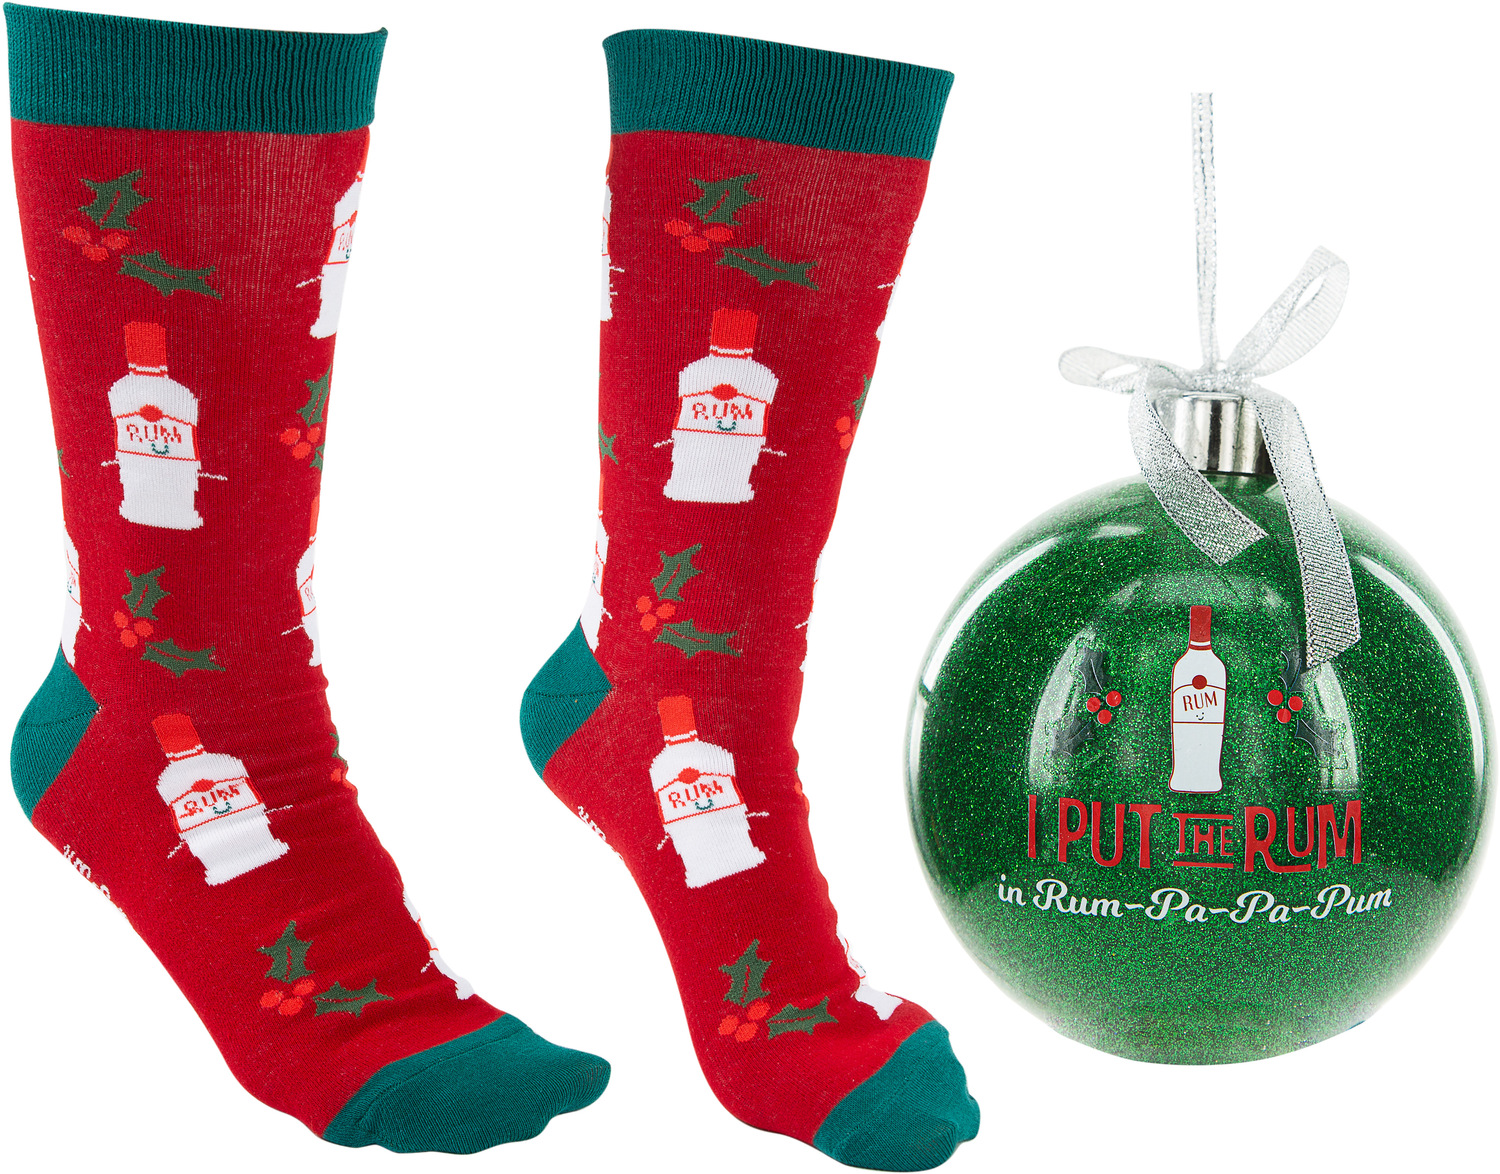 Rum-Pa-Pa-Pum by Late Night Last Call - Rum-Pa-Pa-Pum - 4" Ornament  with Unisex Holiday Socks